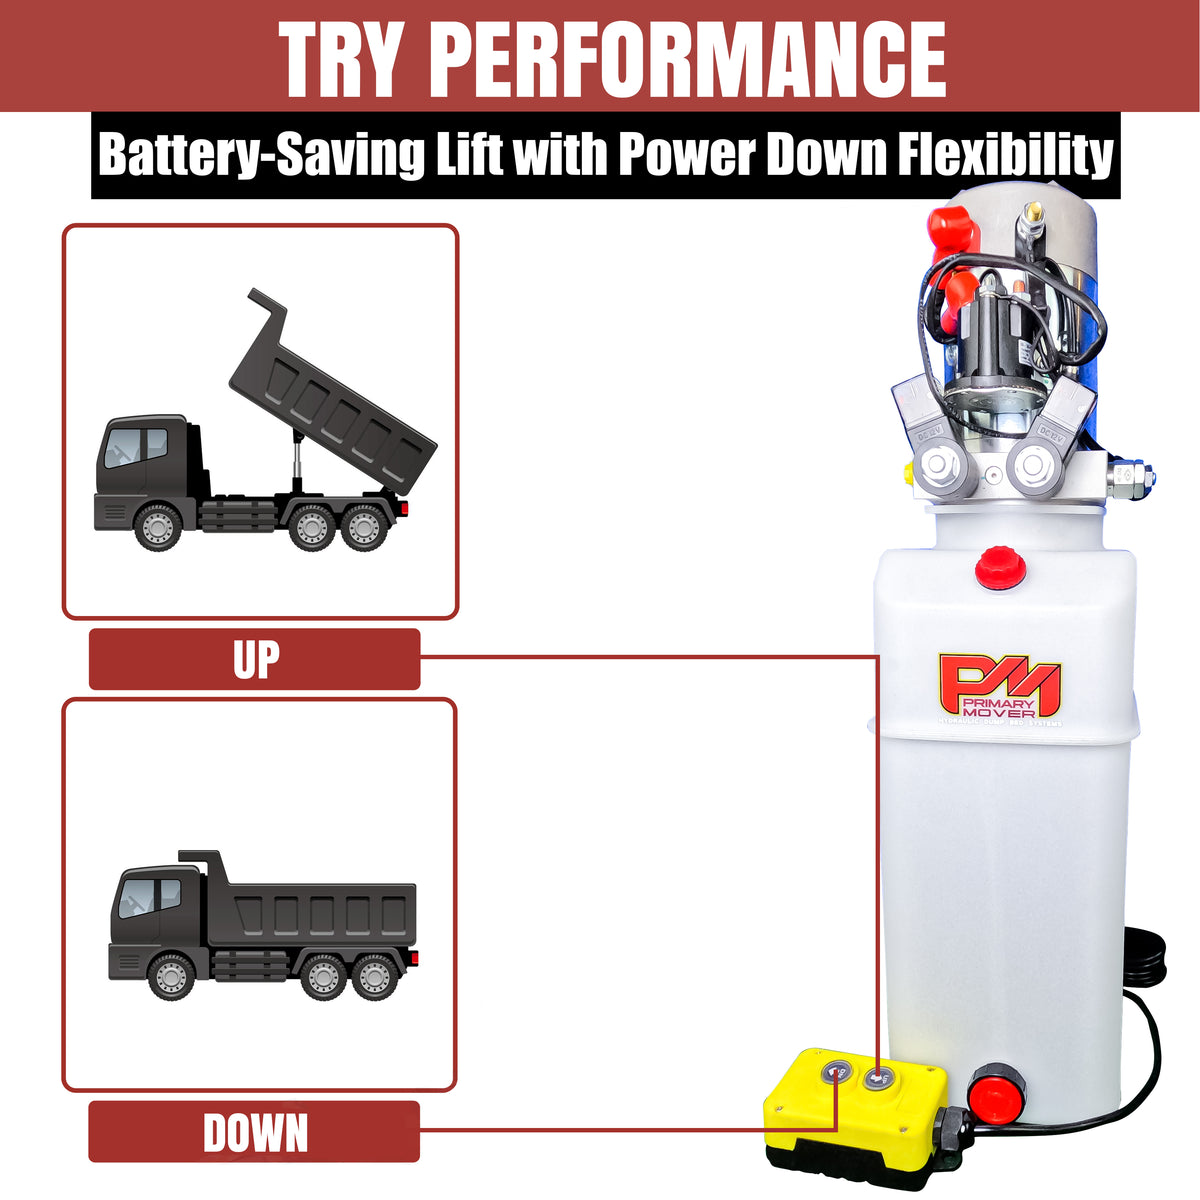 Primary Mover 12V Double-Acting Hydraulic Pump - Poly Reservoir: Precision dual-acting power unit for hydraulic dump beds. Crafted for efficiency and durability, tailored for industrial use.